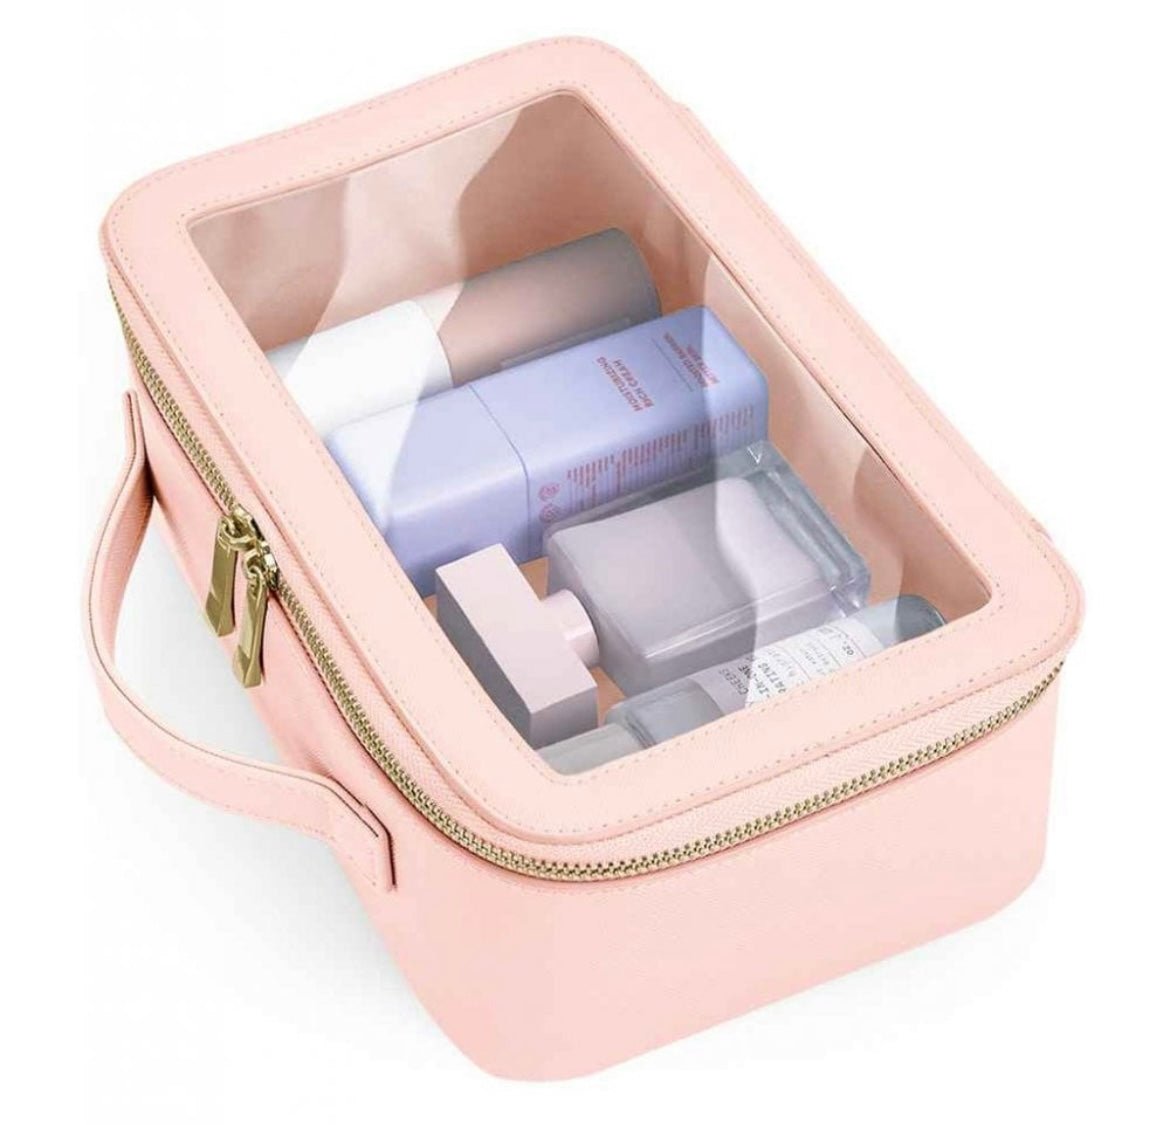 Travel Toiletry Bag with Clear Front - sweetassistant